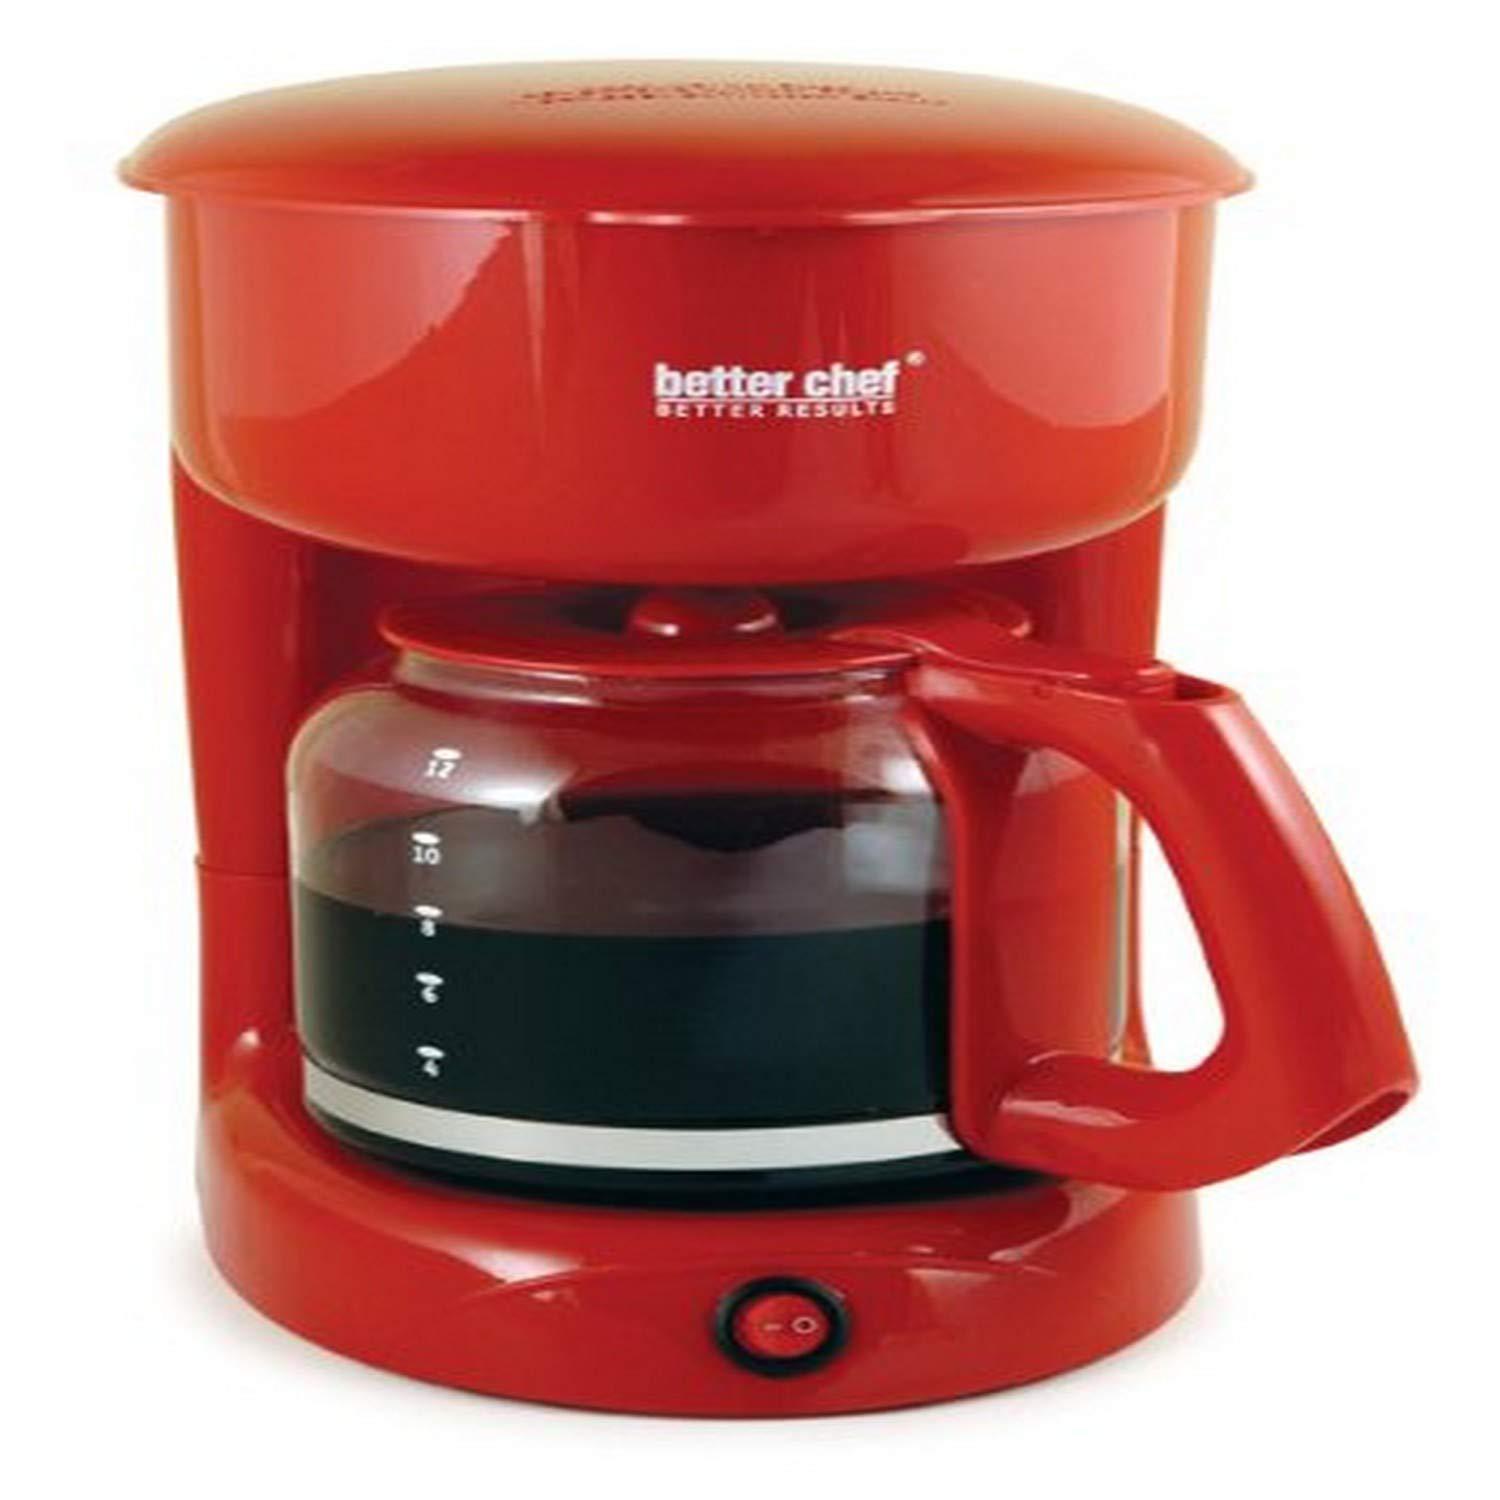 Prime Pacific Trading Company better chef 12-cup coffee maker, red